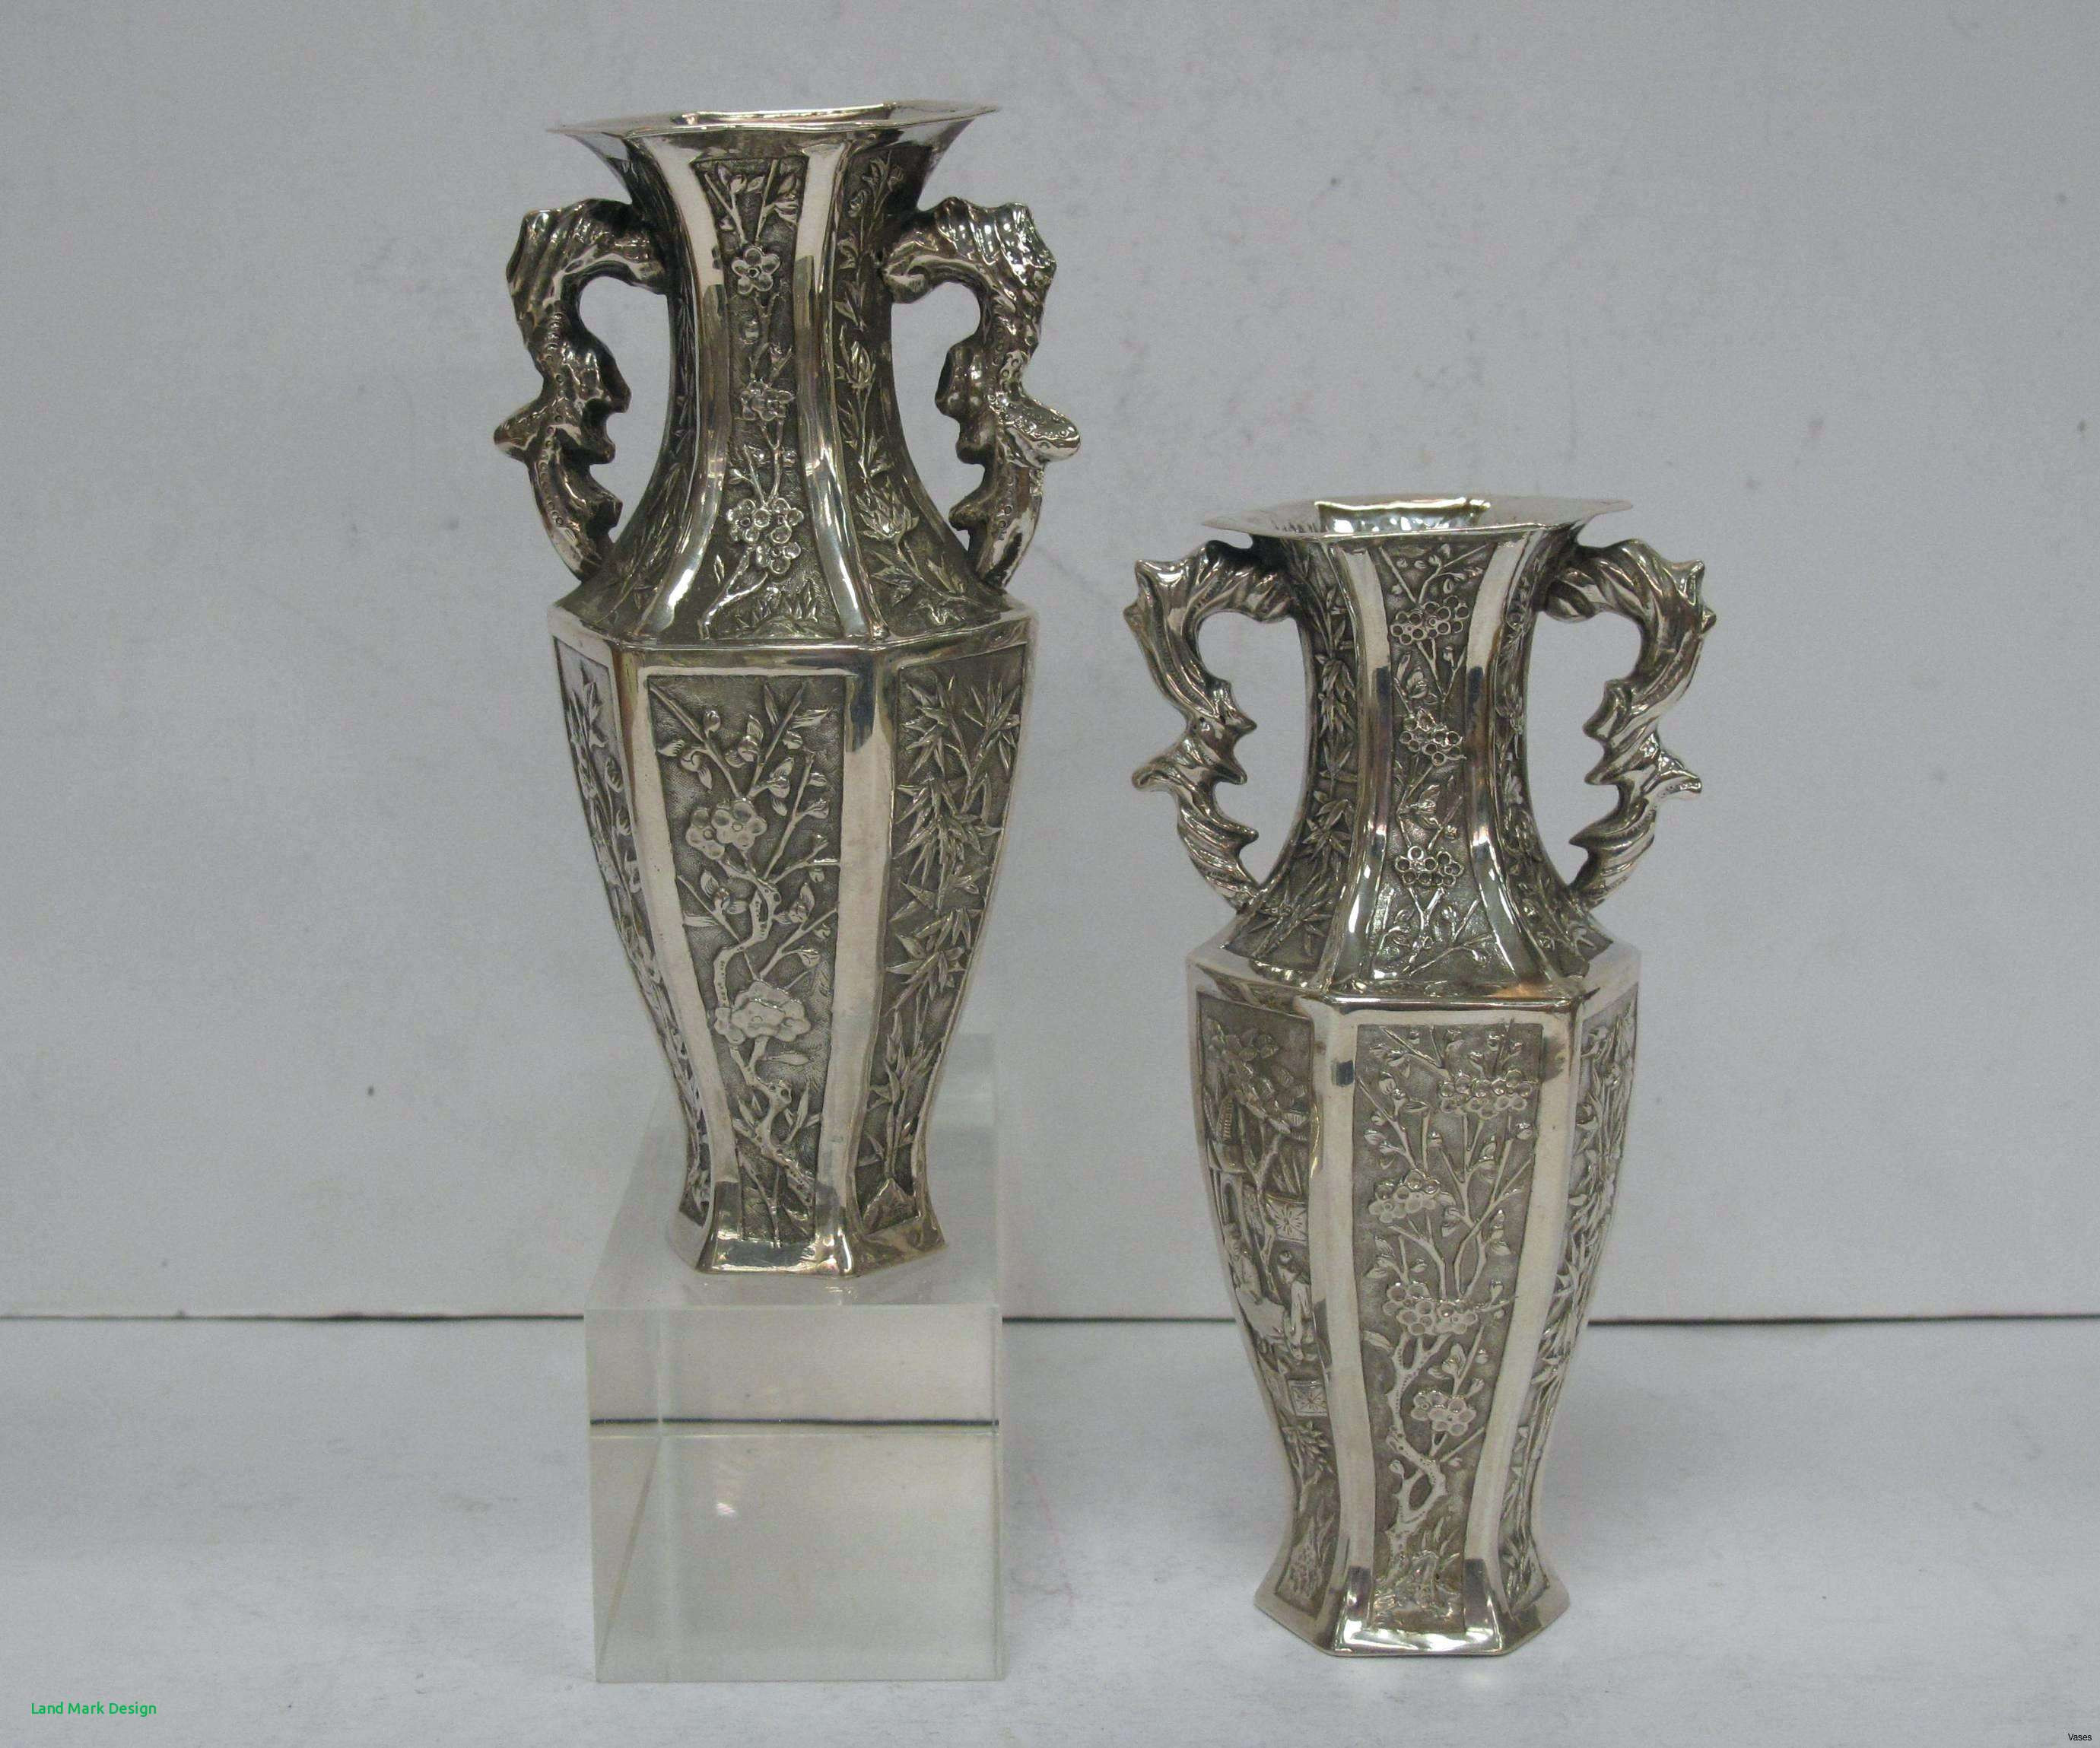 17 attractive Metal Trumpet Vases wholesale 2024 free download metal trumpet vases wholesale of unique crystal vase awards beginneryogaclassesnear me with regard to 8253h vases bulk silver square glass cube vase with metallic band 6x6i 0d vases bulk sil